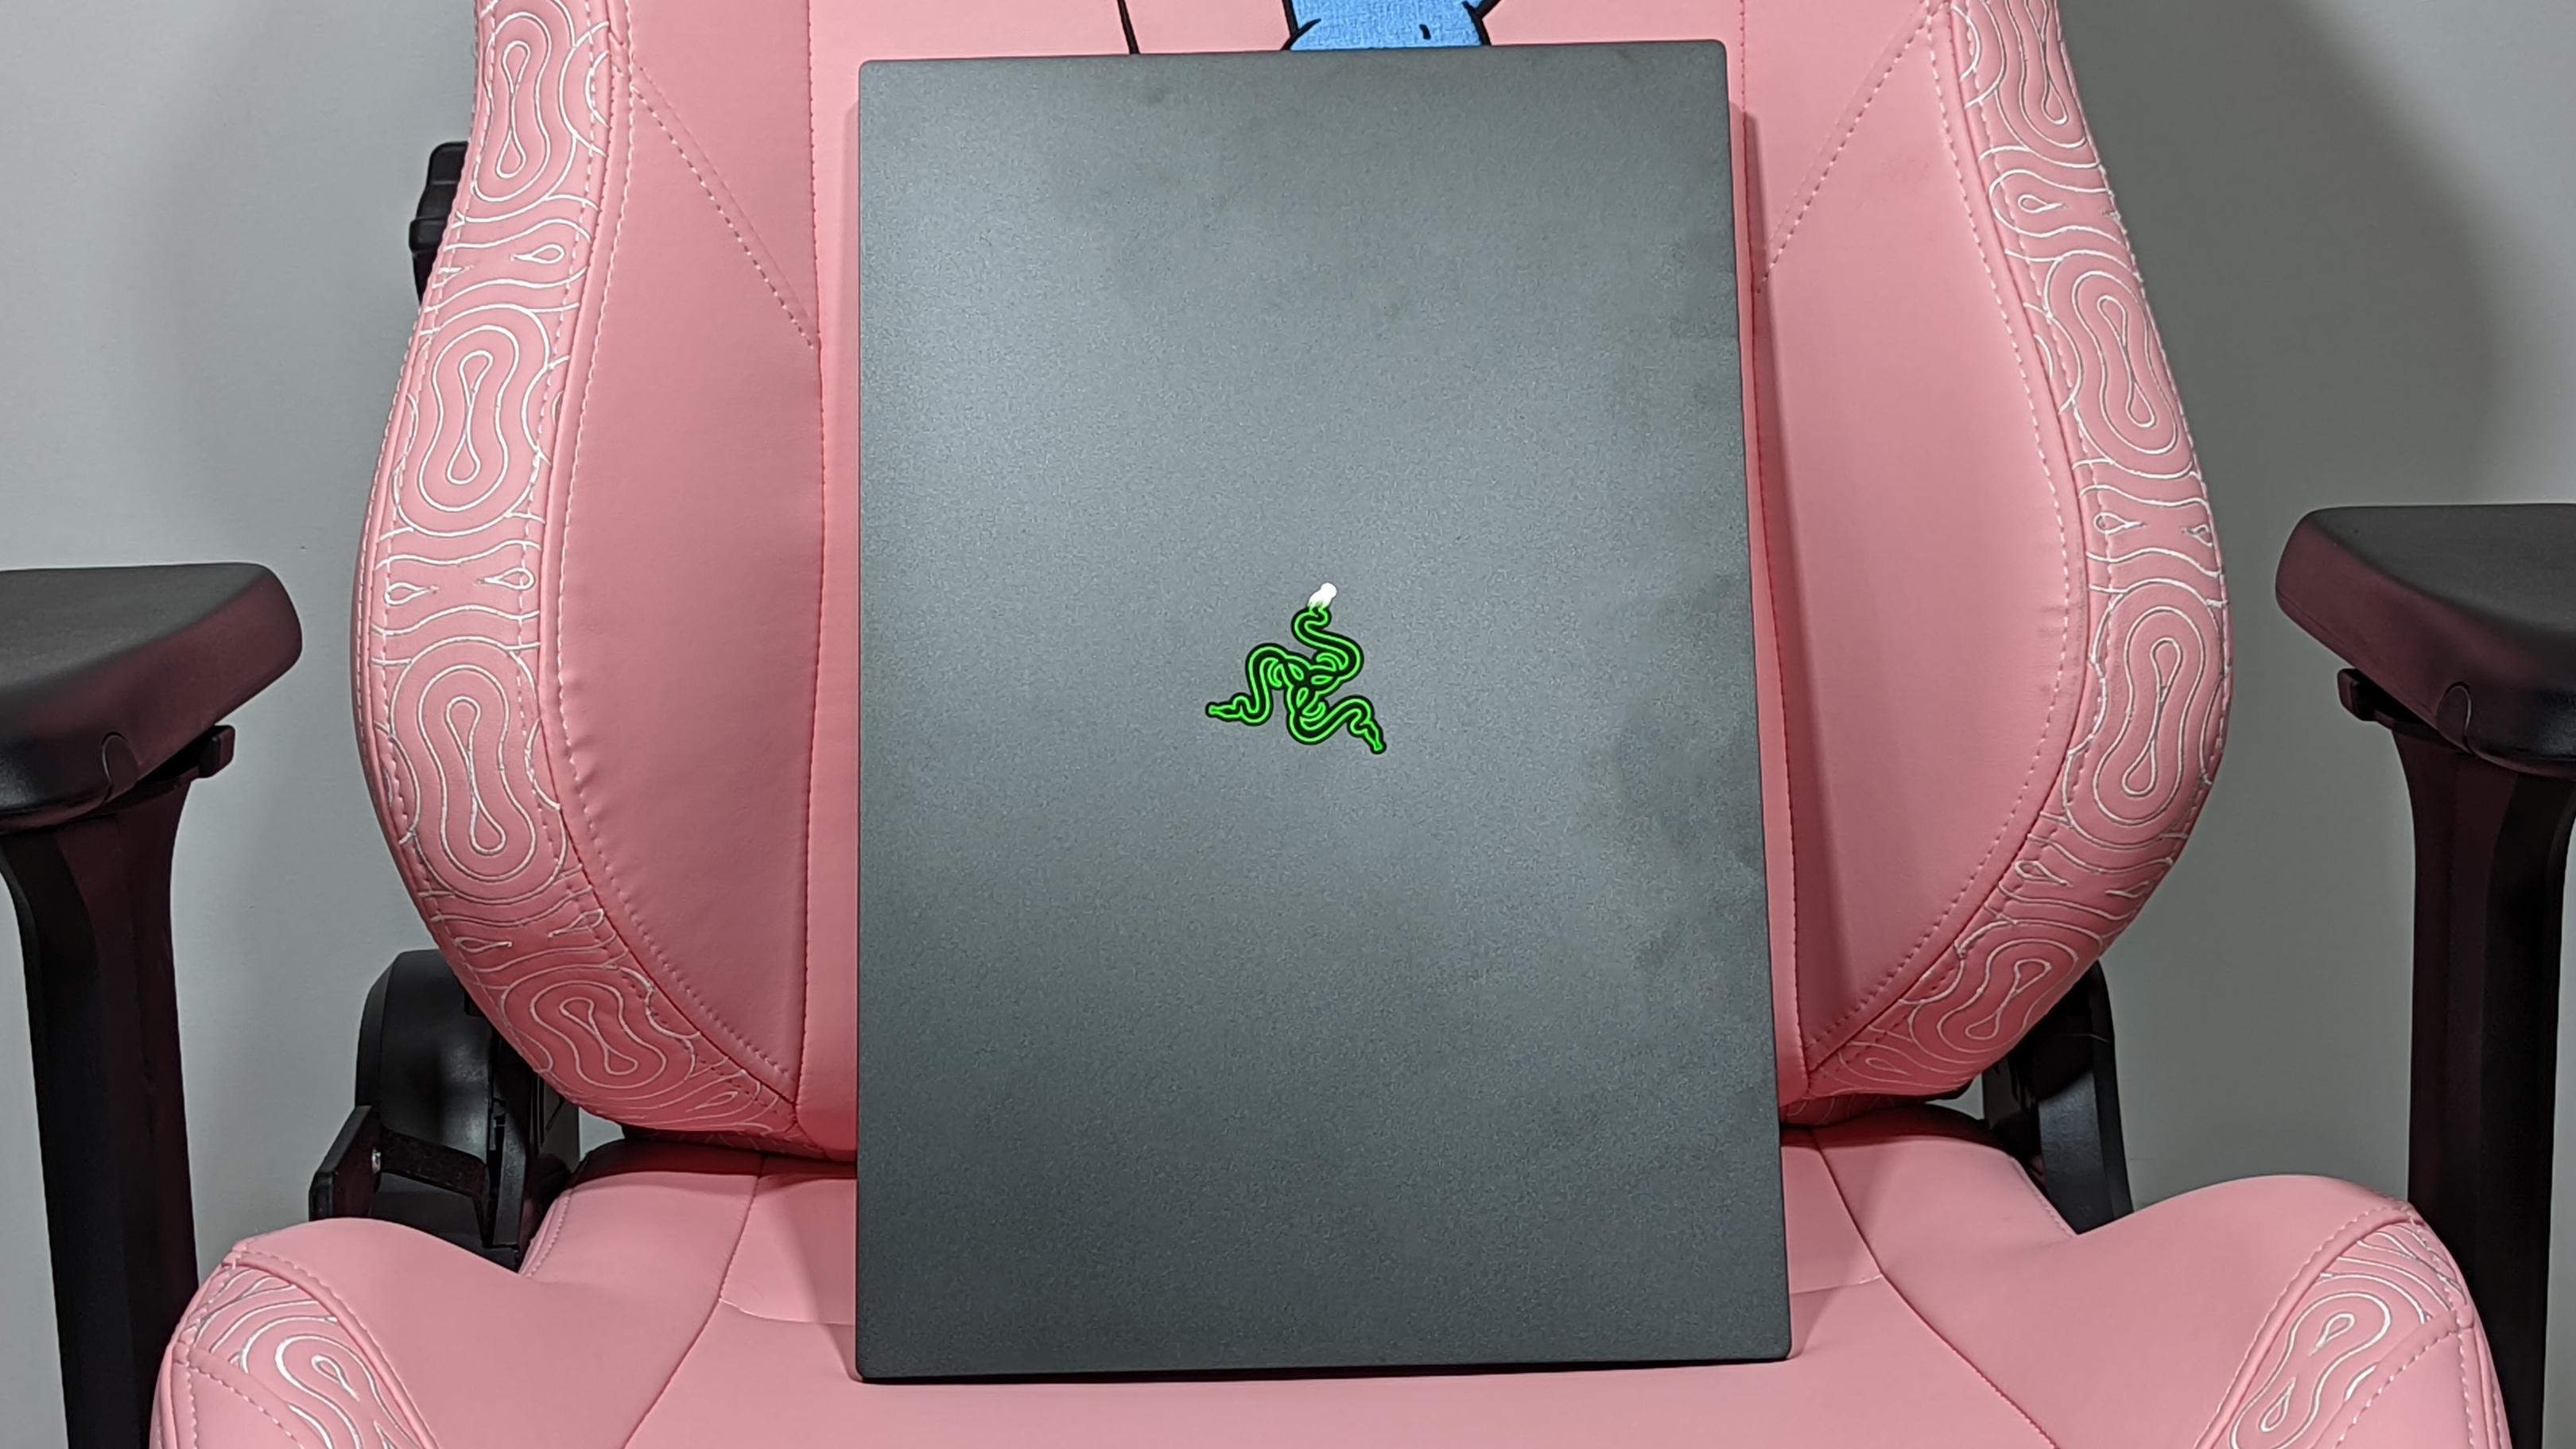 Razer Blade 17 (Early 2022) review